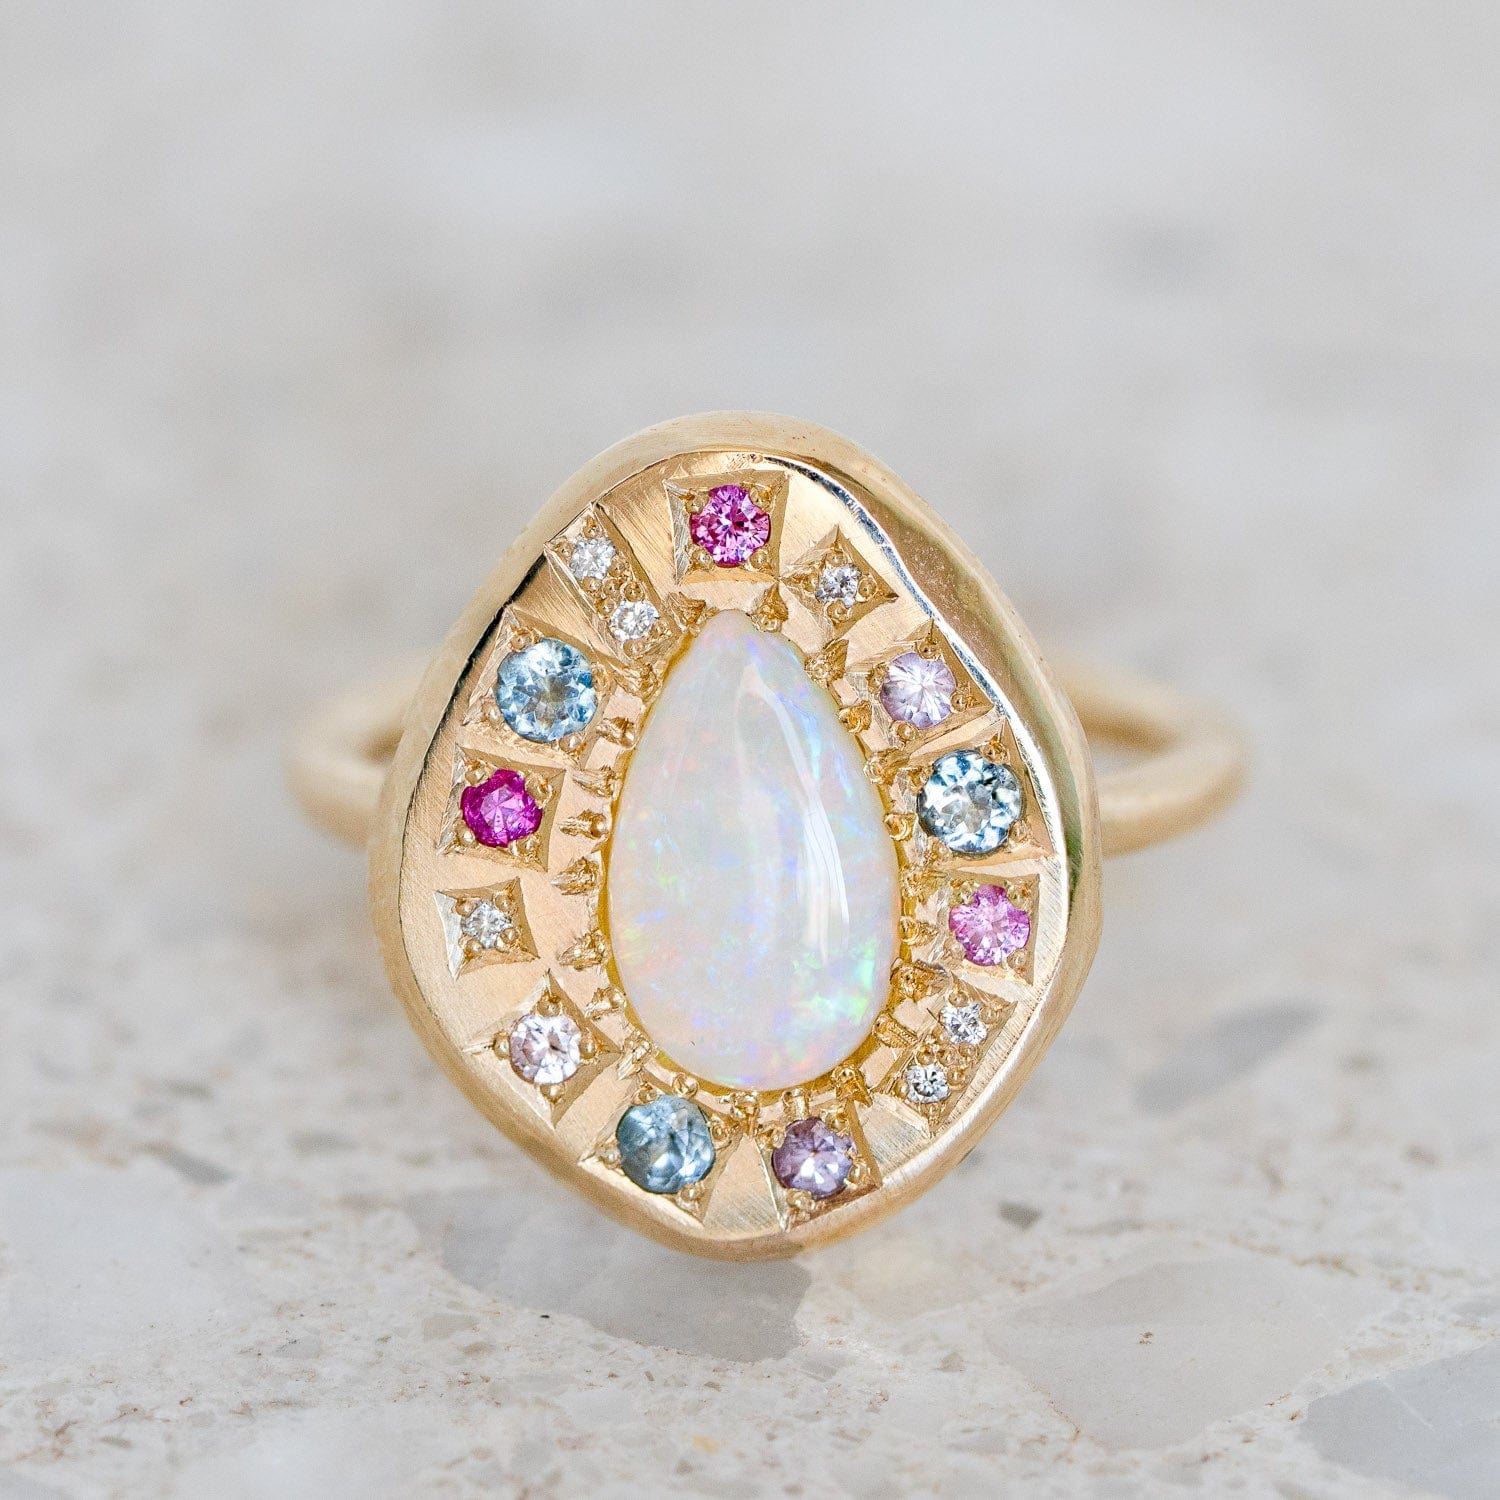 Luxury Promise Crystal Opal surrounded by pink sapphires, aquamarines and diamonds set in 14K Yellow Gold